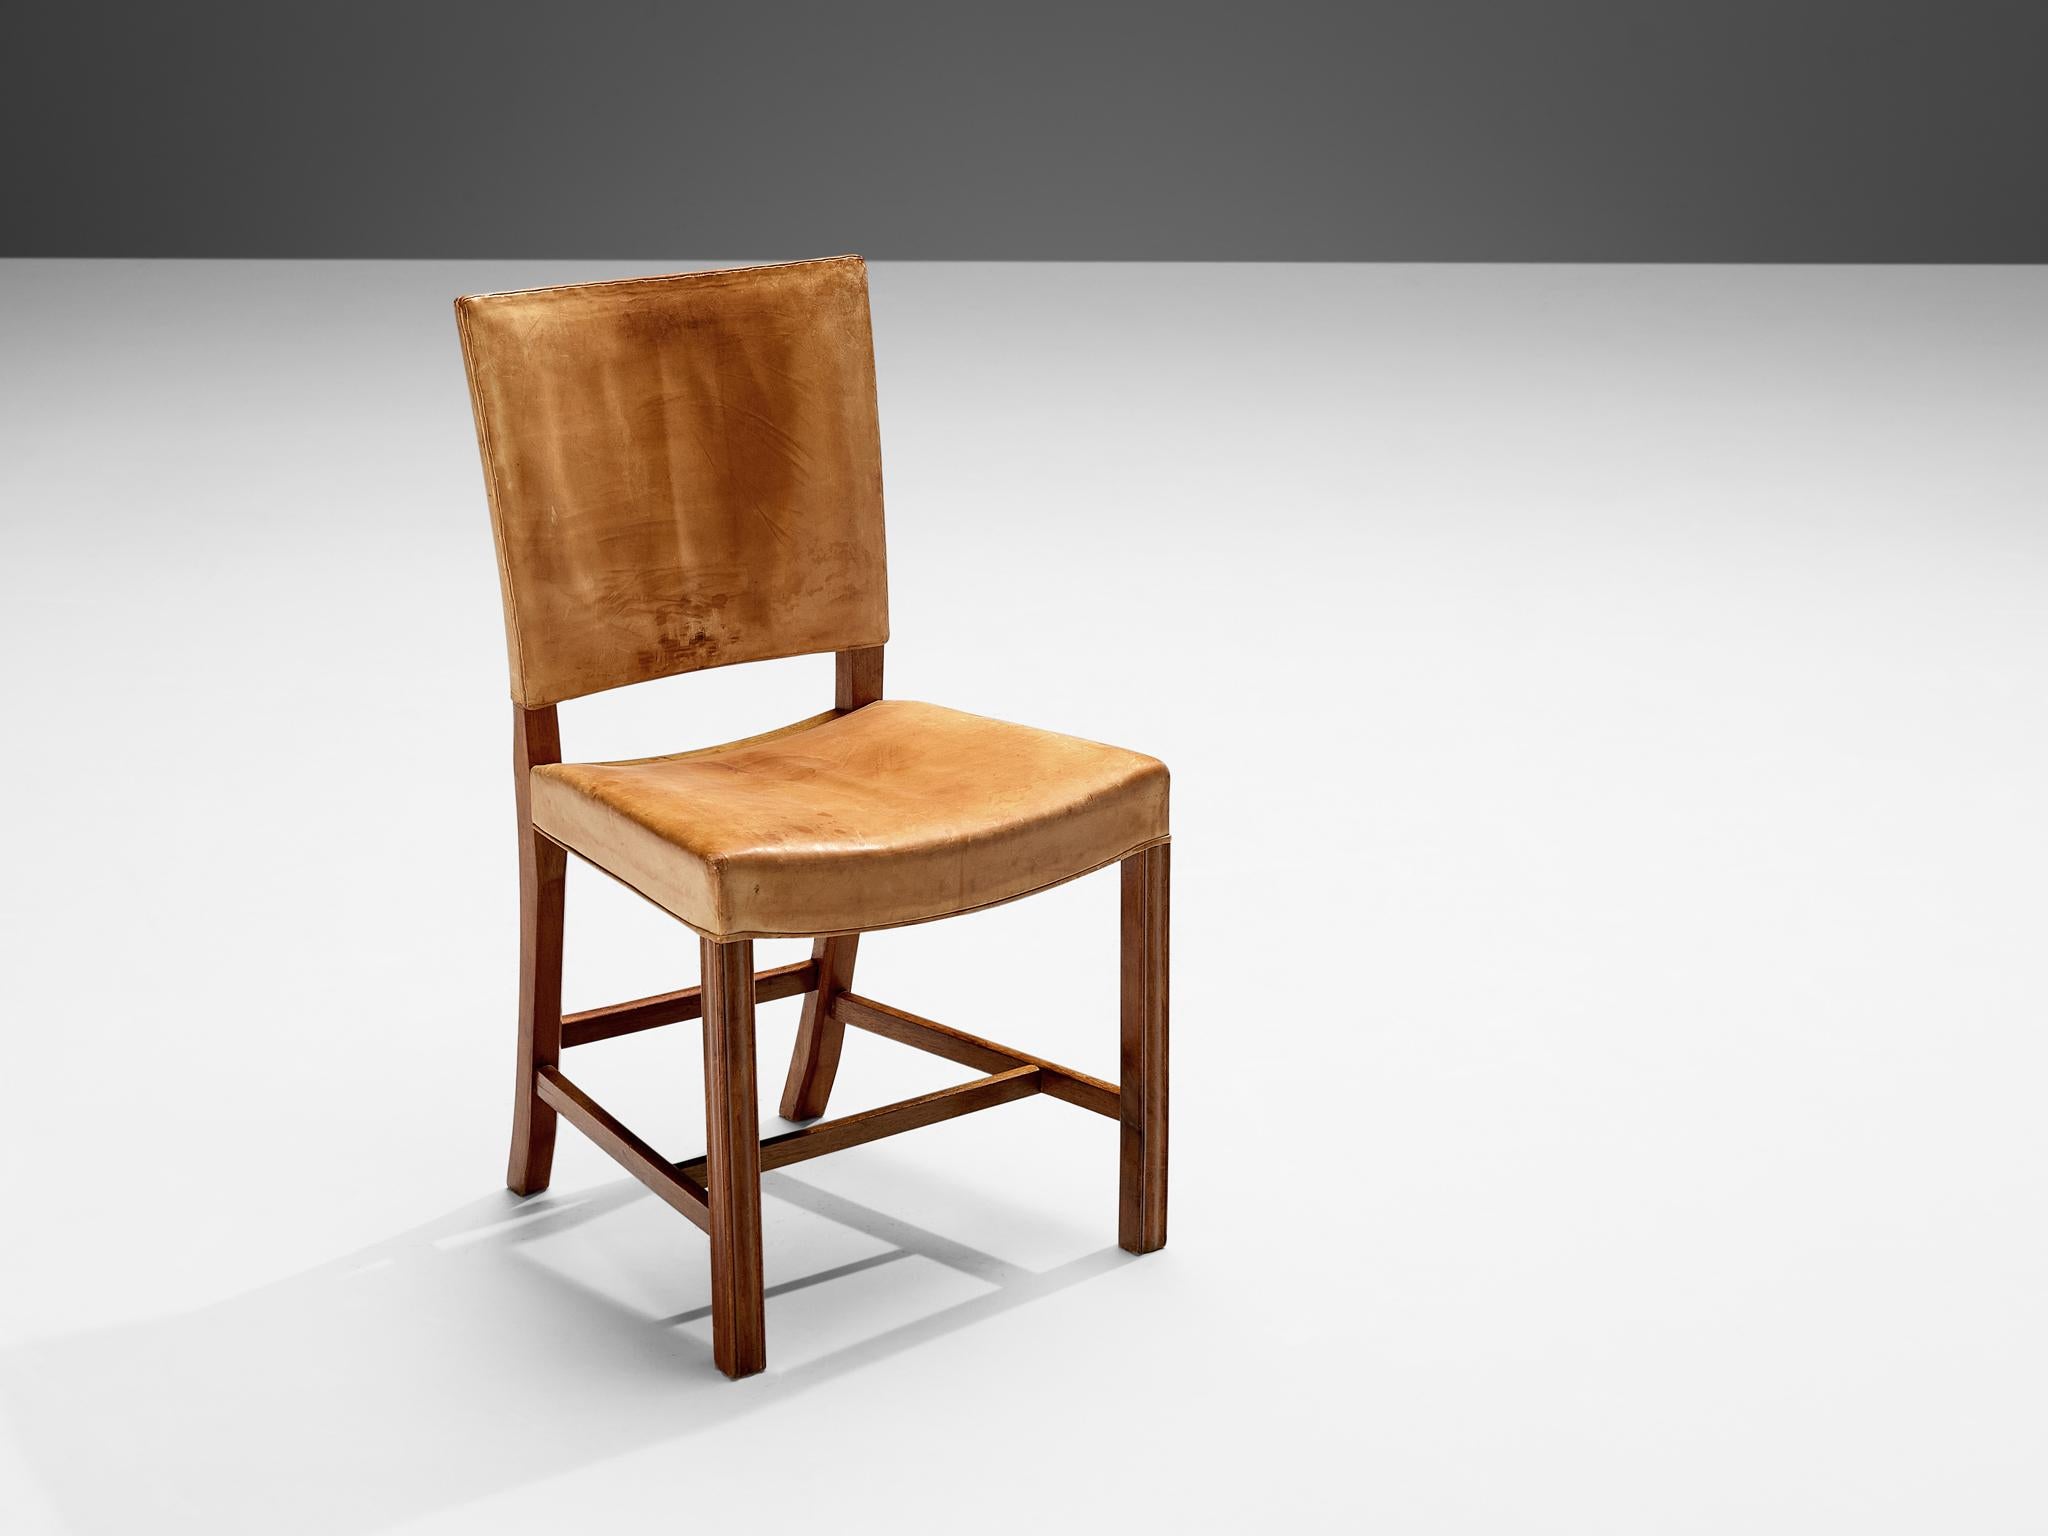 Kaare Klint for Rud Rasmussen, dining chair, 'The Red Chair', model 3949, original patinated leather, mahogany, Denmark, designed 1928, manufactured 1960s.

This dining chair in camel leather upholstery is designed in 1928 and manufactured in the